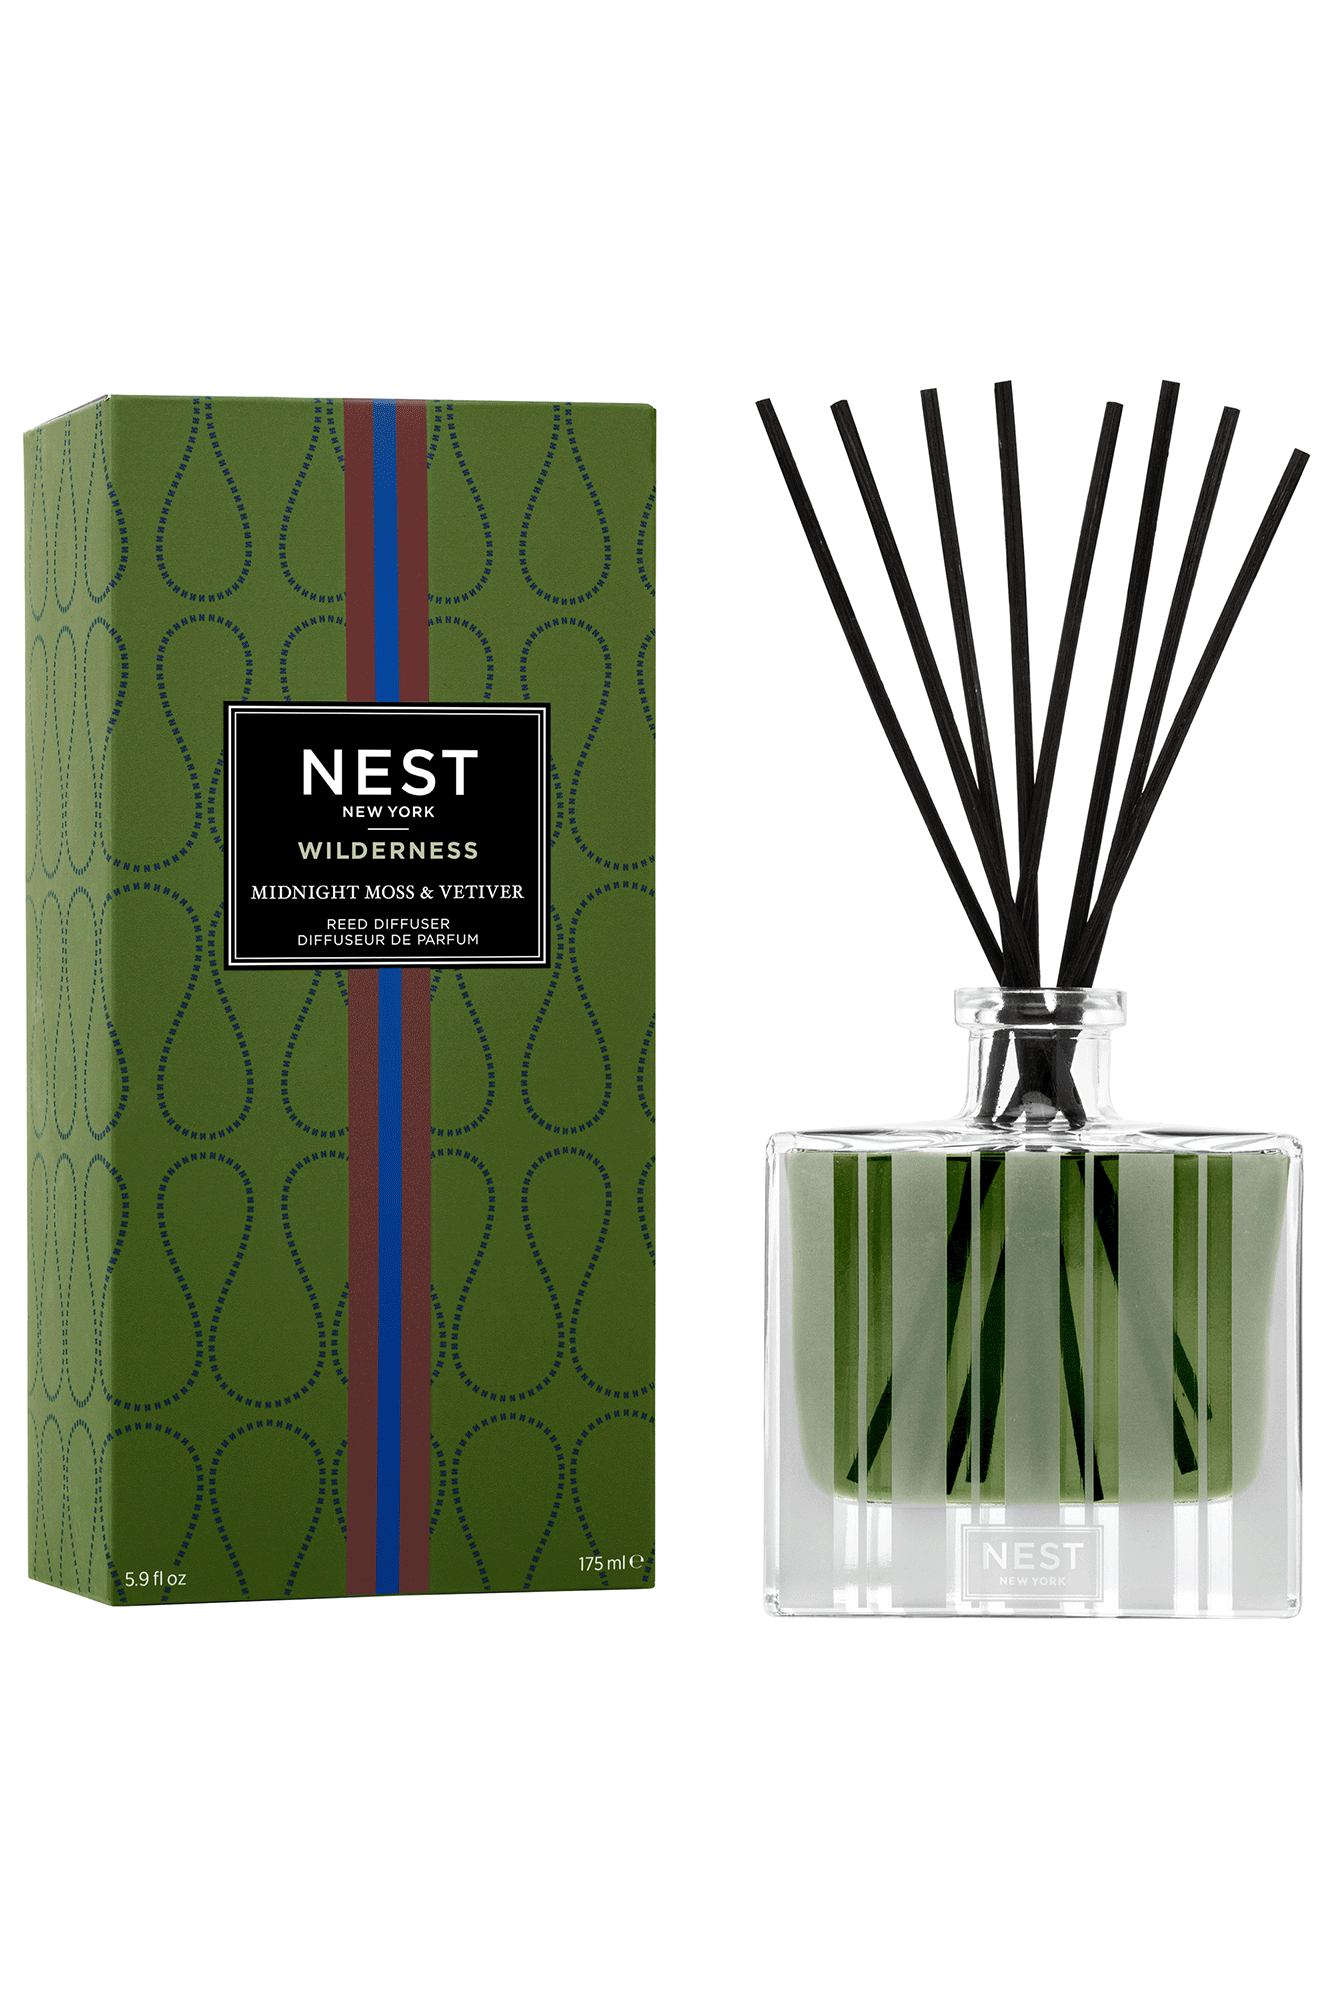 Brighten up your home with the Midnight Moss & Vetiver Reed Diffuser from Nest. Featuring a proprietary premium wax blend, this exquisitely scented candle provides a clean and even burn while subtly filling your space with a luxurious scent. Enjoy your favorite fragrance longer with this high-quality candle.